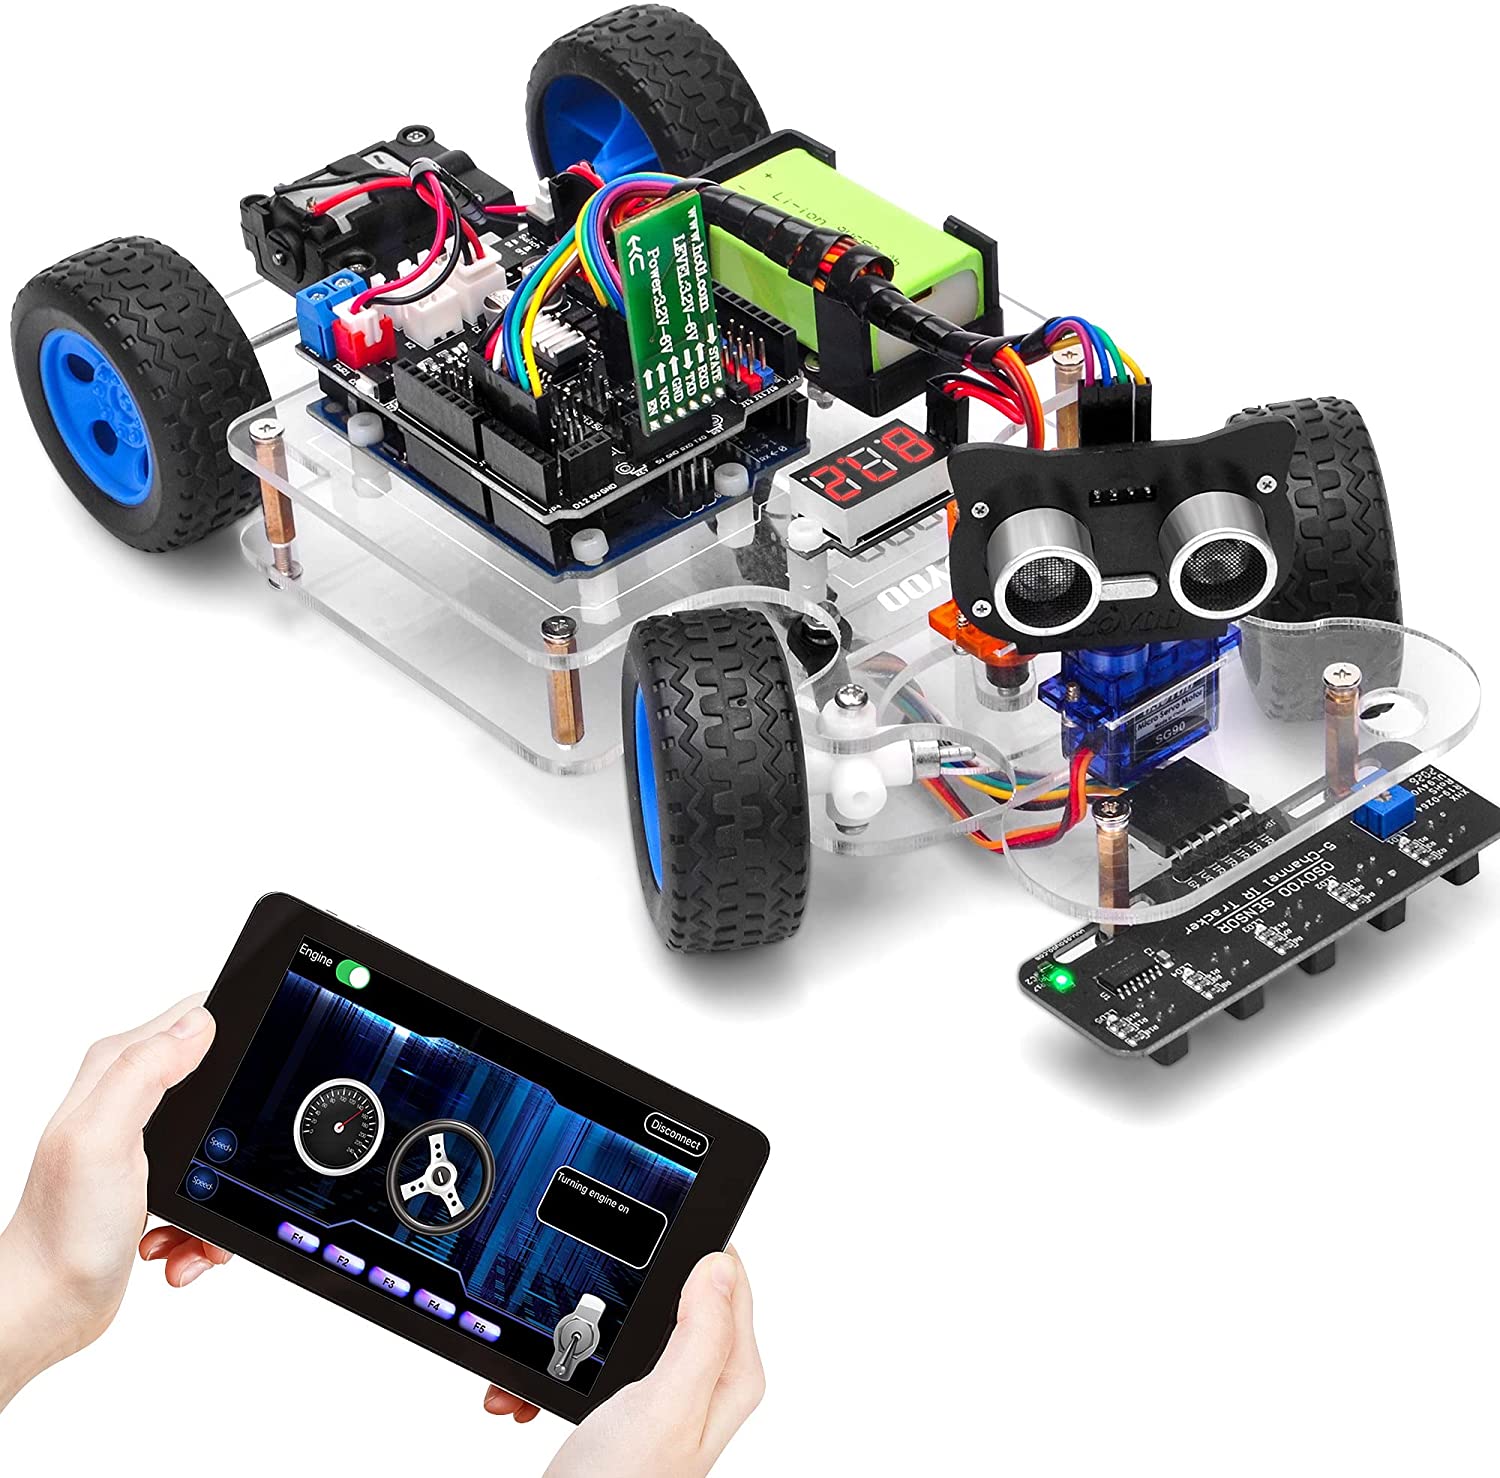 OSOYOO Robot Rc Smart Car DIY Kit to Build for Adults Teens with Servo  Power Steering Motor, WiFi, Bluetooth, Code Programmable Compatible with